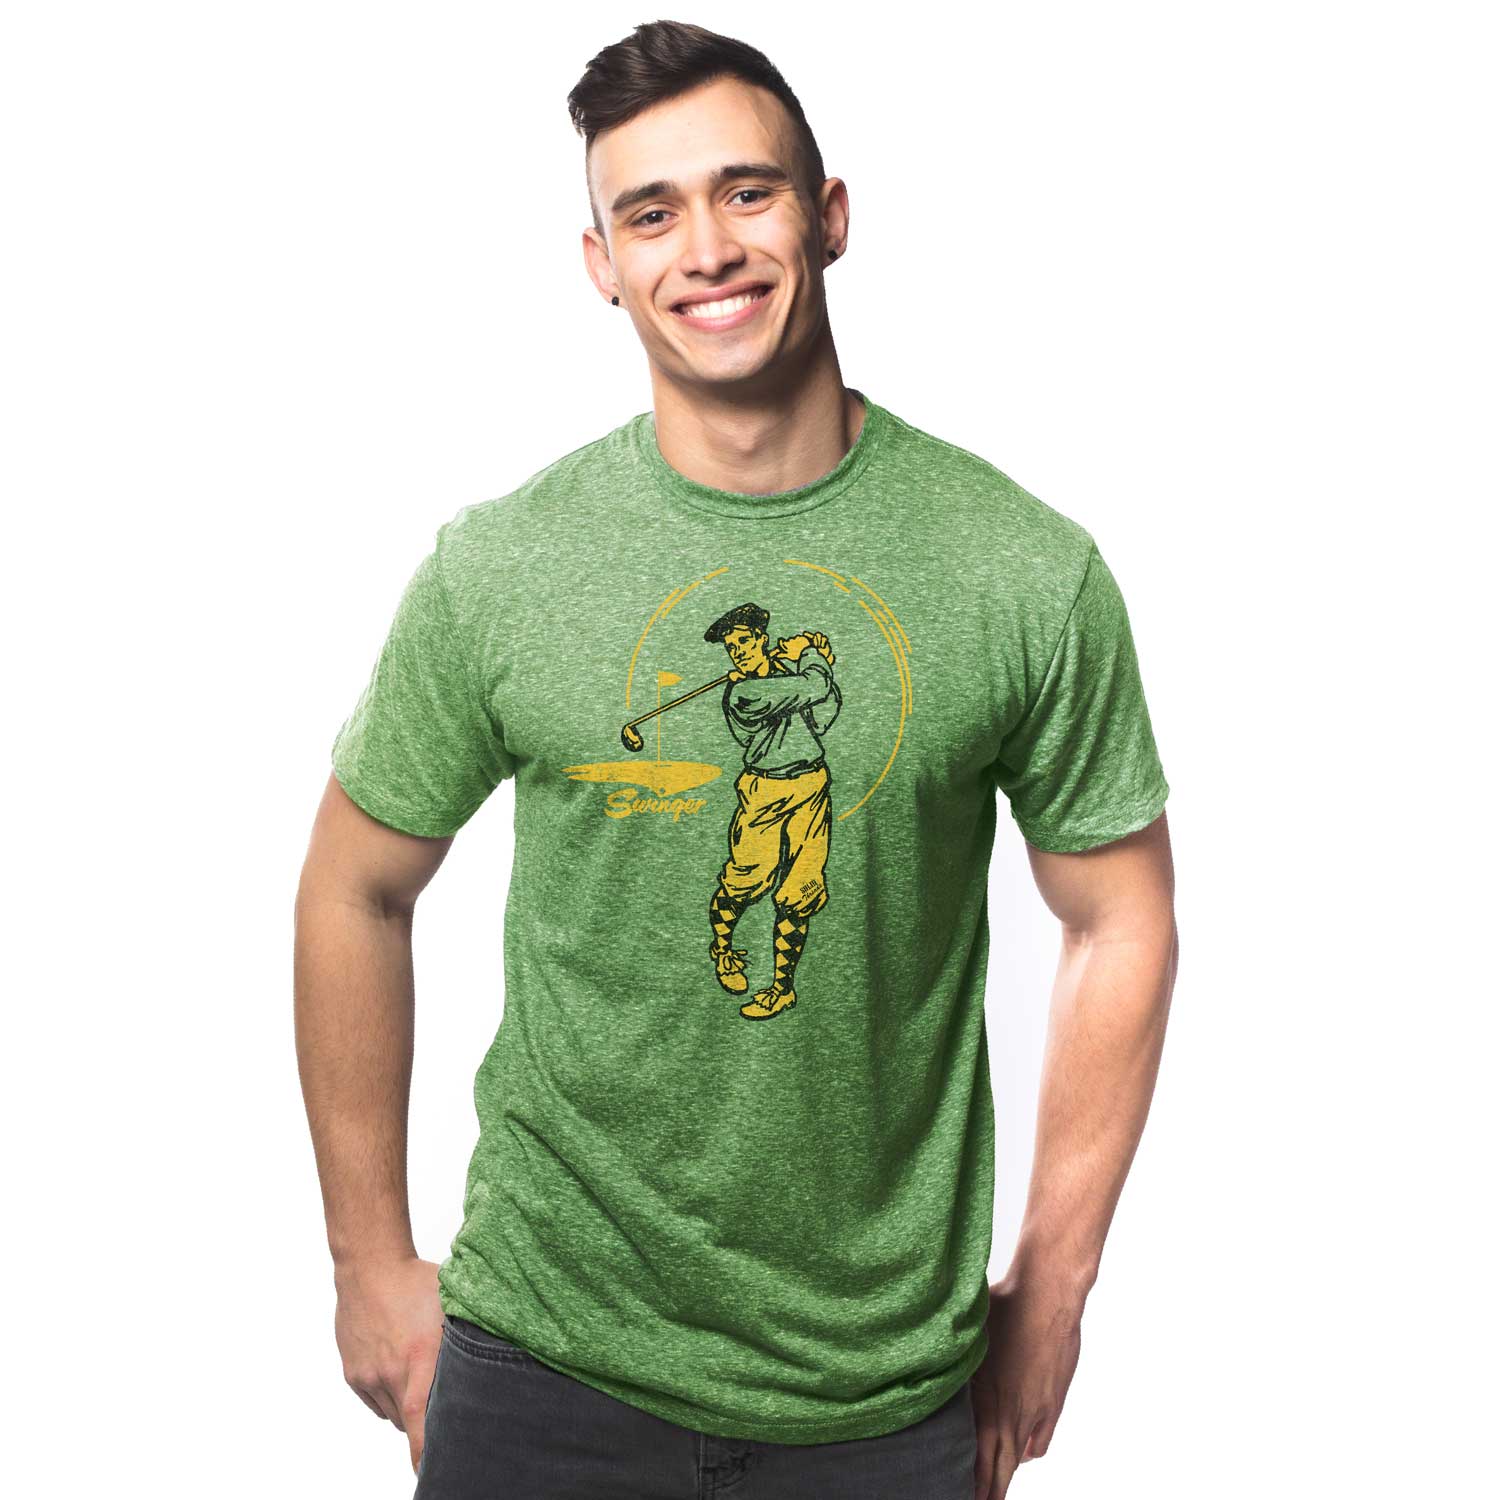 Men's Swinger Vintage Inspired T-shirt | Cool Funny Retro Golf Graphic Tee on Model | Solid Threads